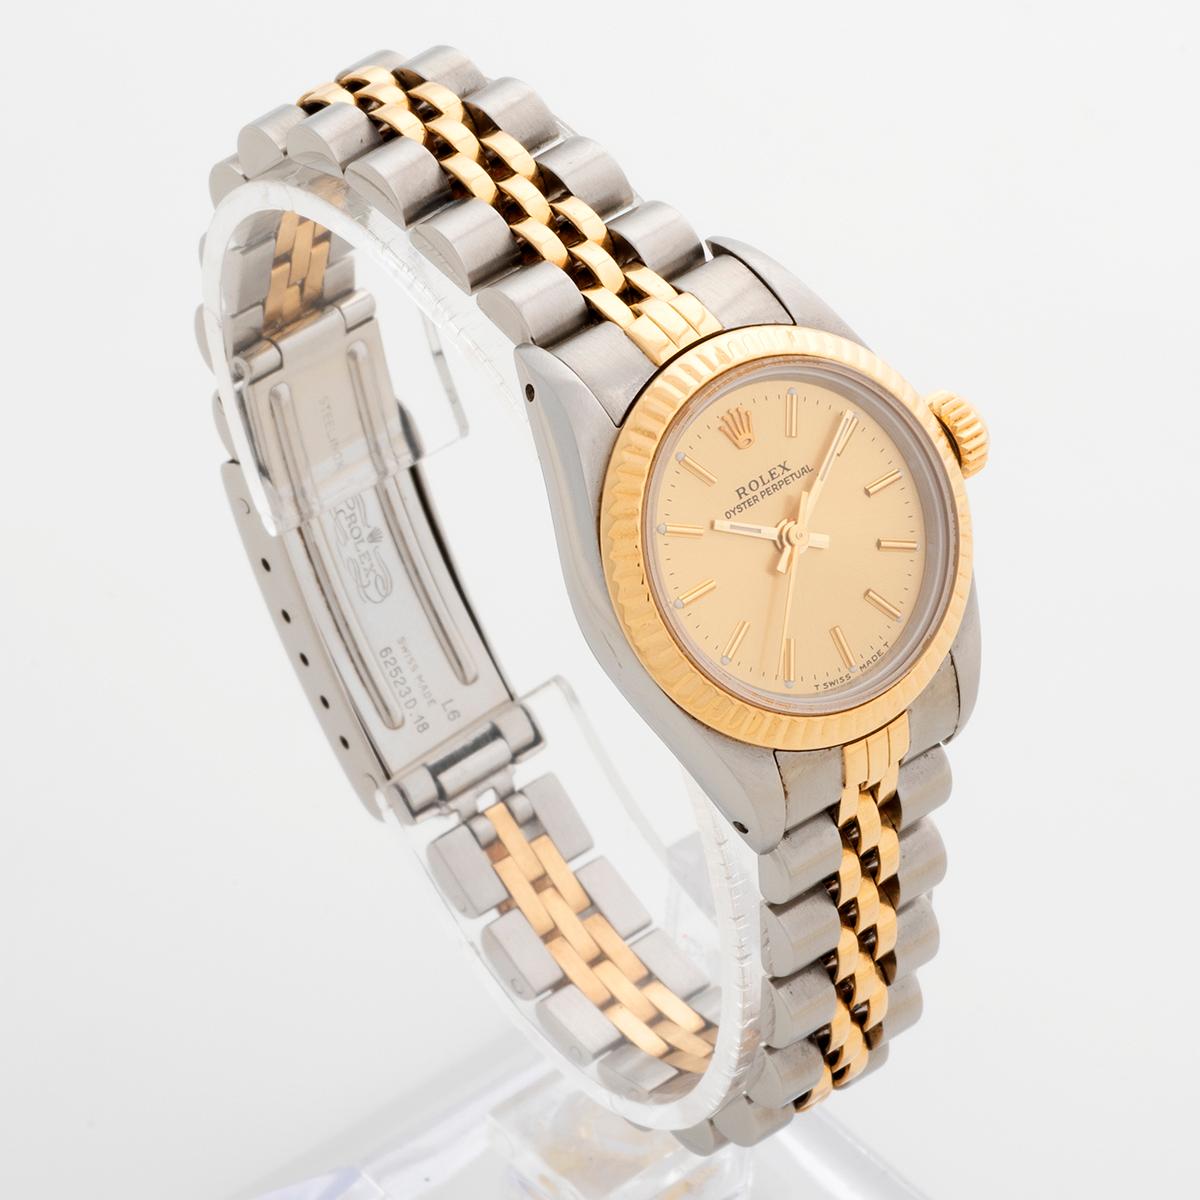 Our very attractive Rolex Lady Oyster Perpetual, reference 67193, features a 26mm stainless steel case with 18k yellow gold bezel , champagne dial and stainless steel and 18k yellow gold jubilee bracelet. Presented in excellent condition , this is